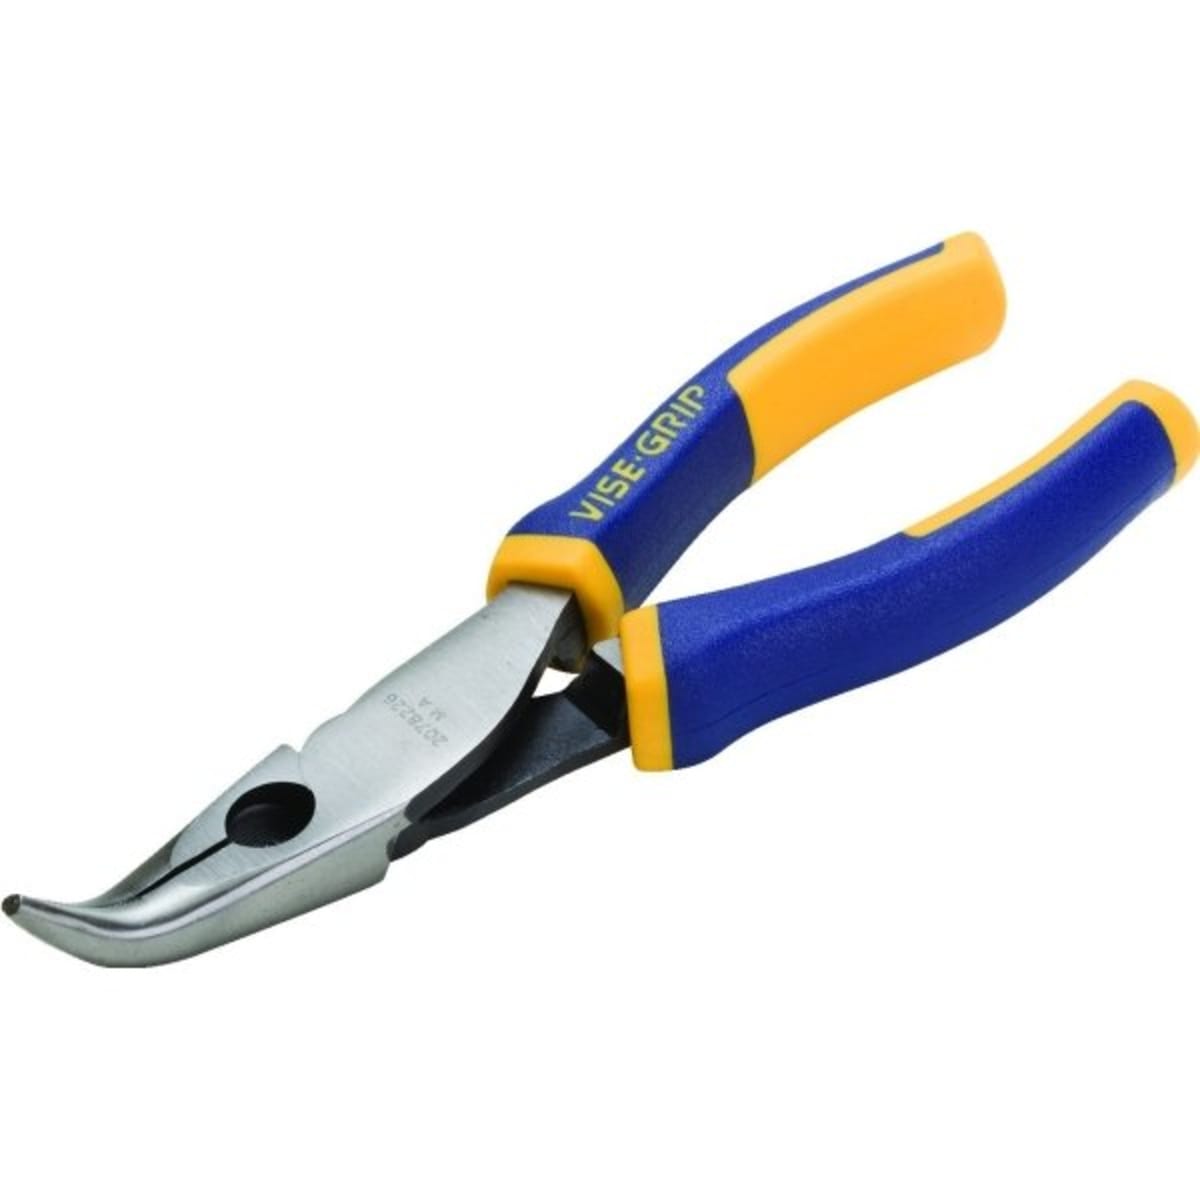 IRWIN Vise-Grip 11-in Electrical Needle Nose Pliers at